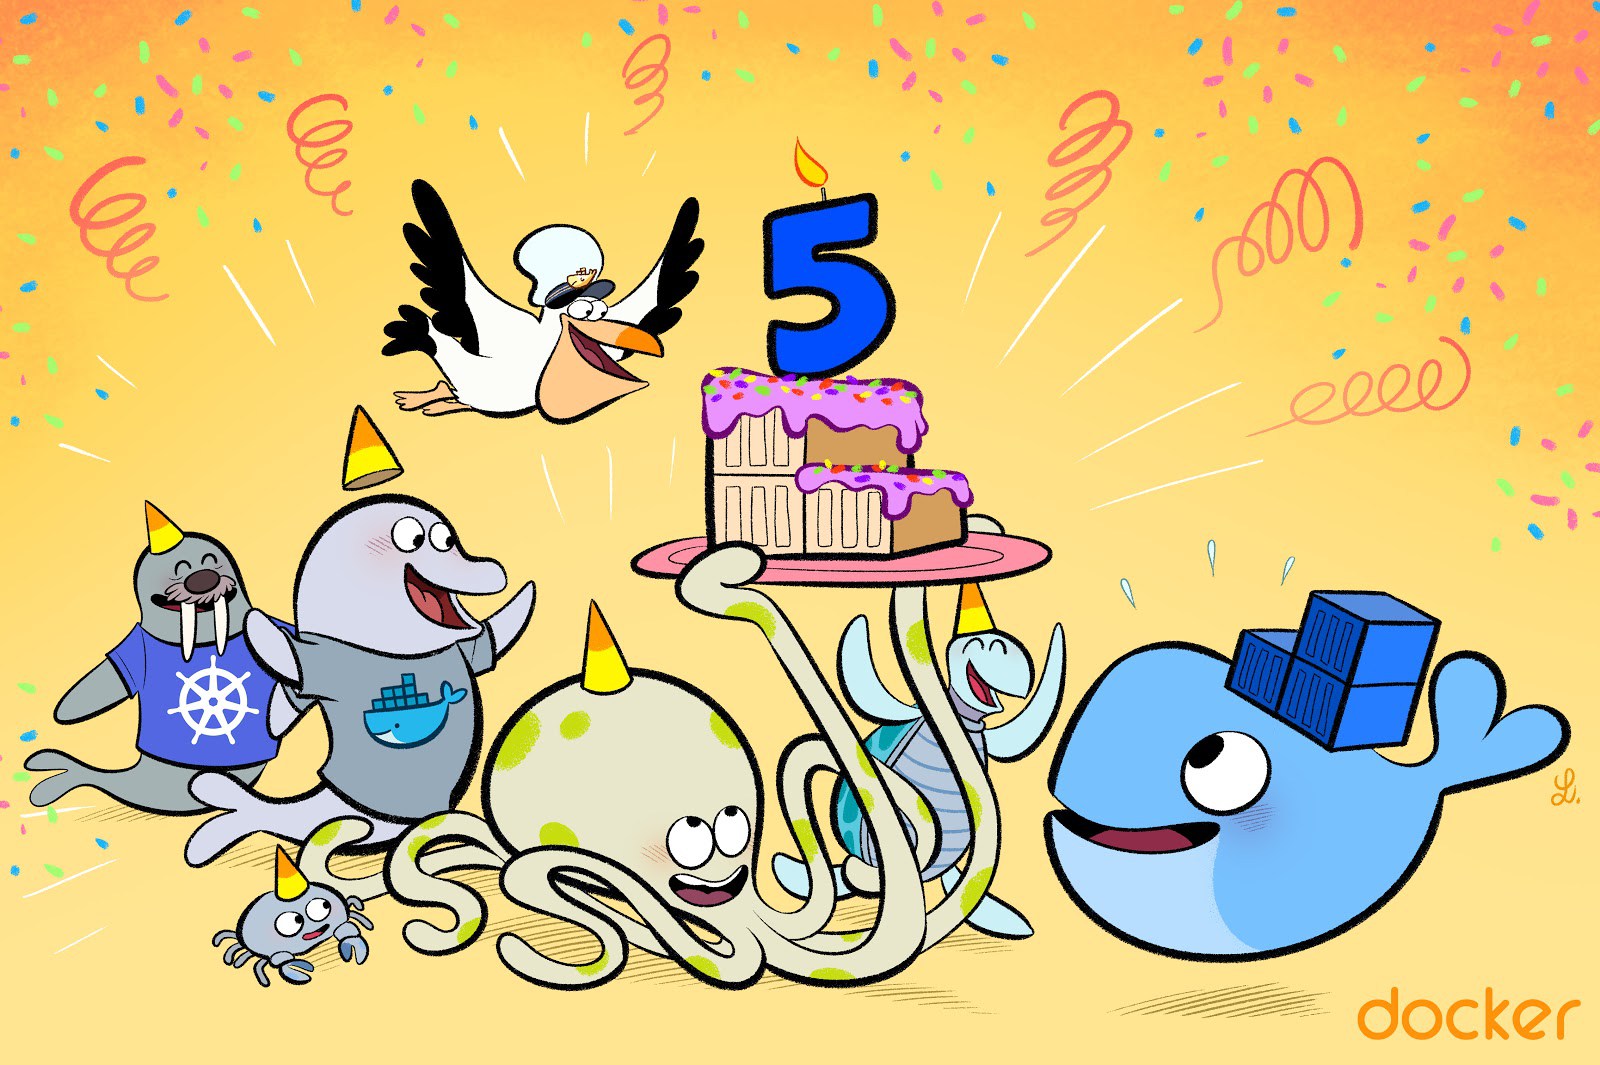 Cartoon showing Docker mascots and a birthday cake with the number 5